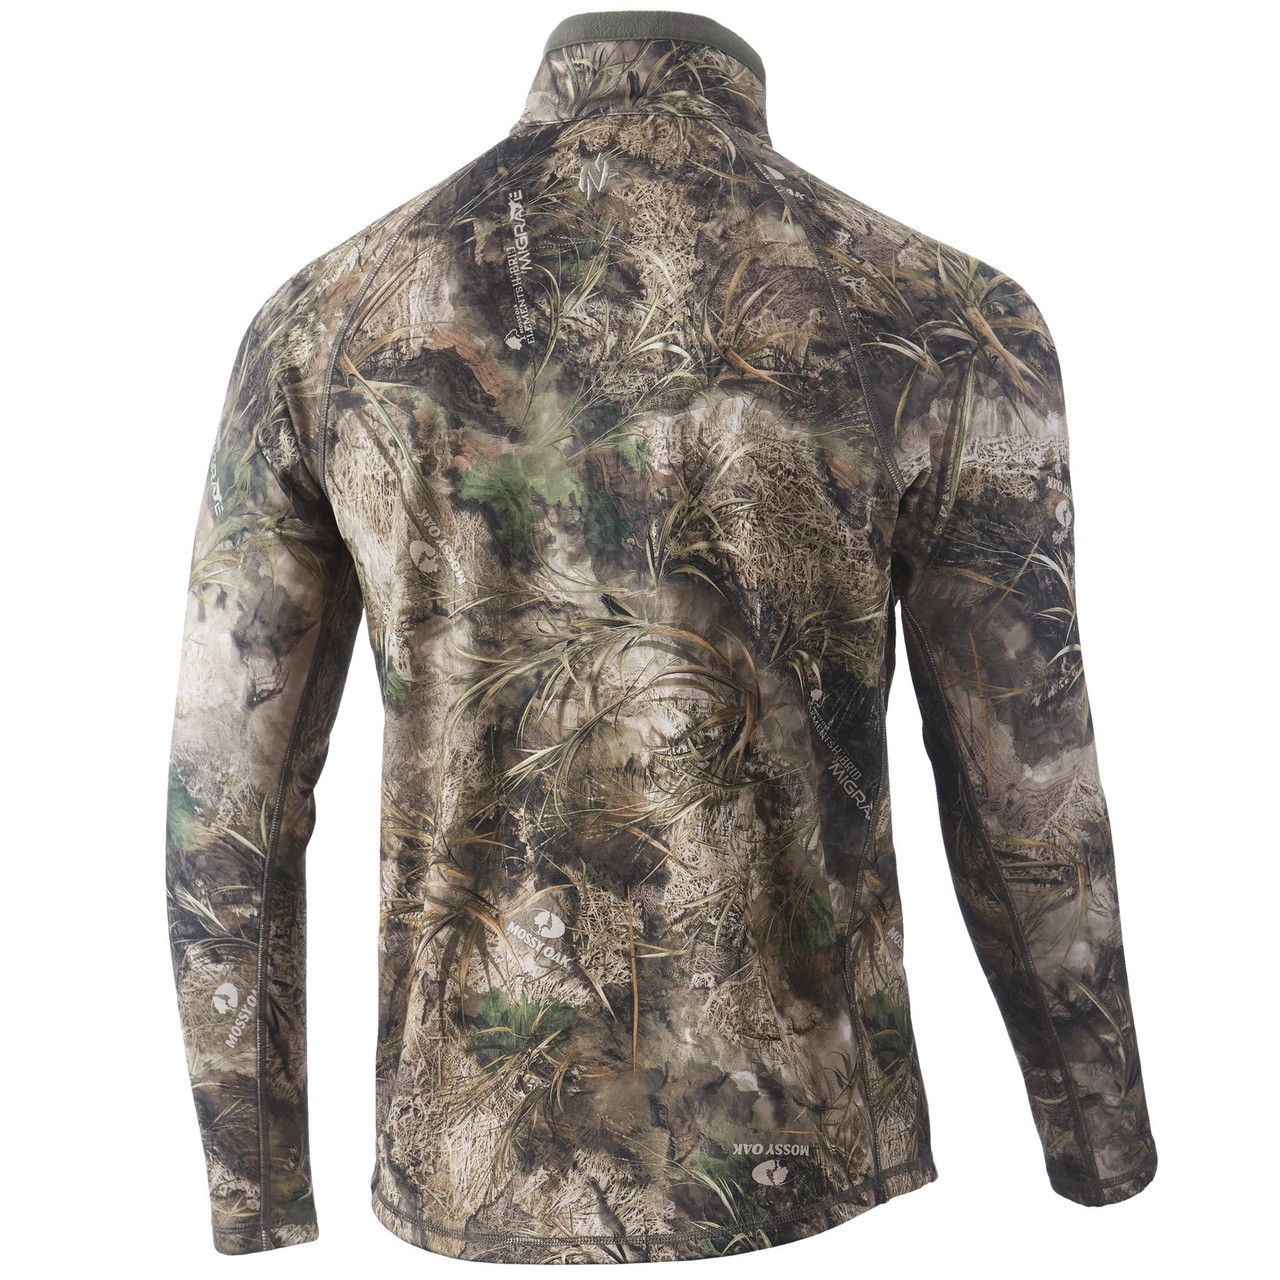 Nomad Utility Camo Pullover Jacket 1/2 Zip - Mossy Oak Migrate - X-Large